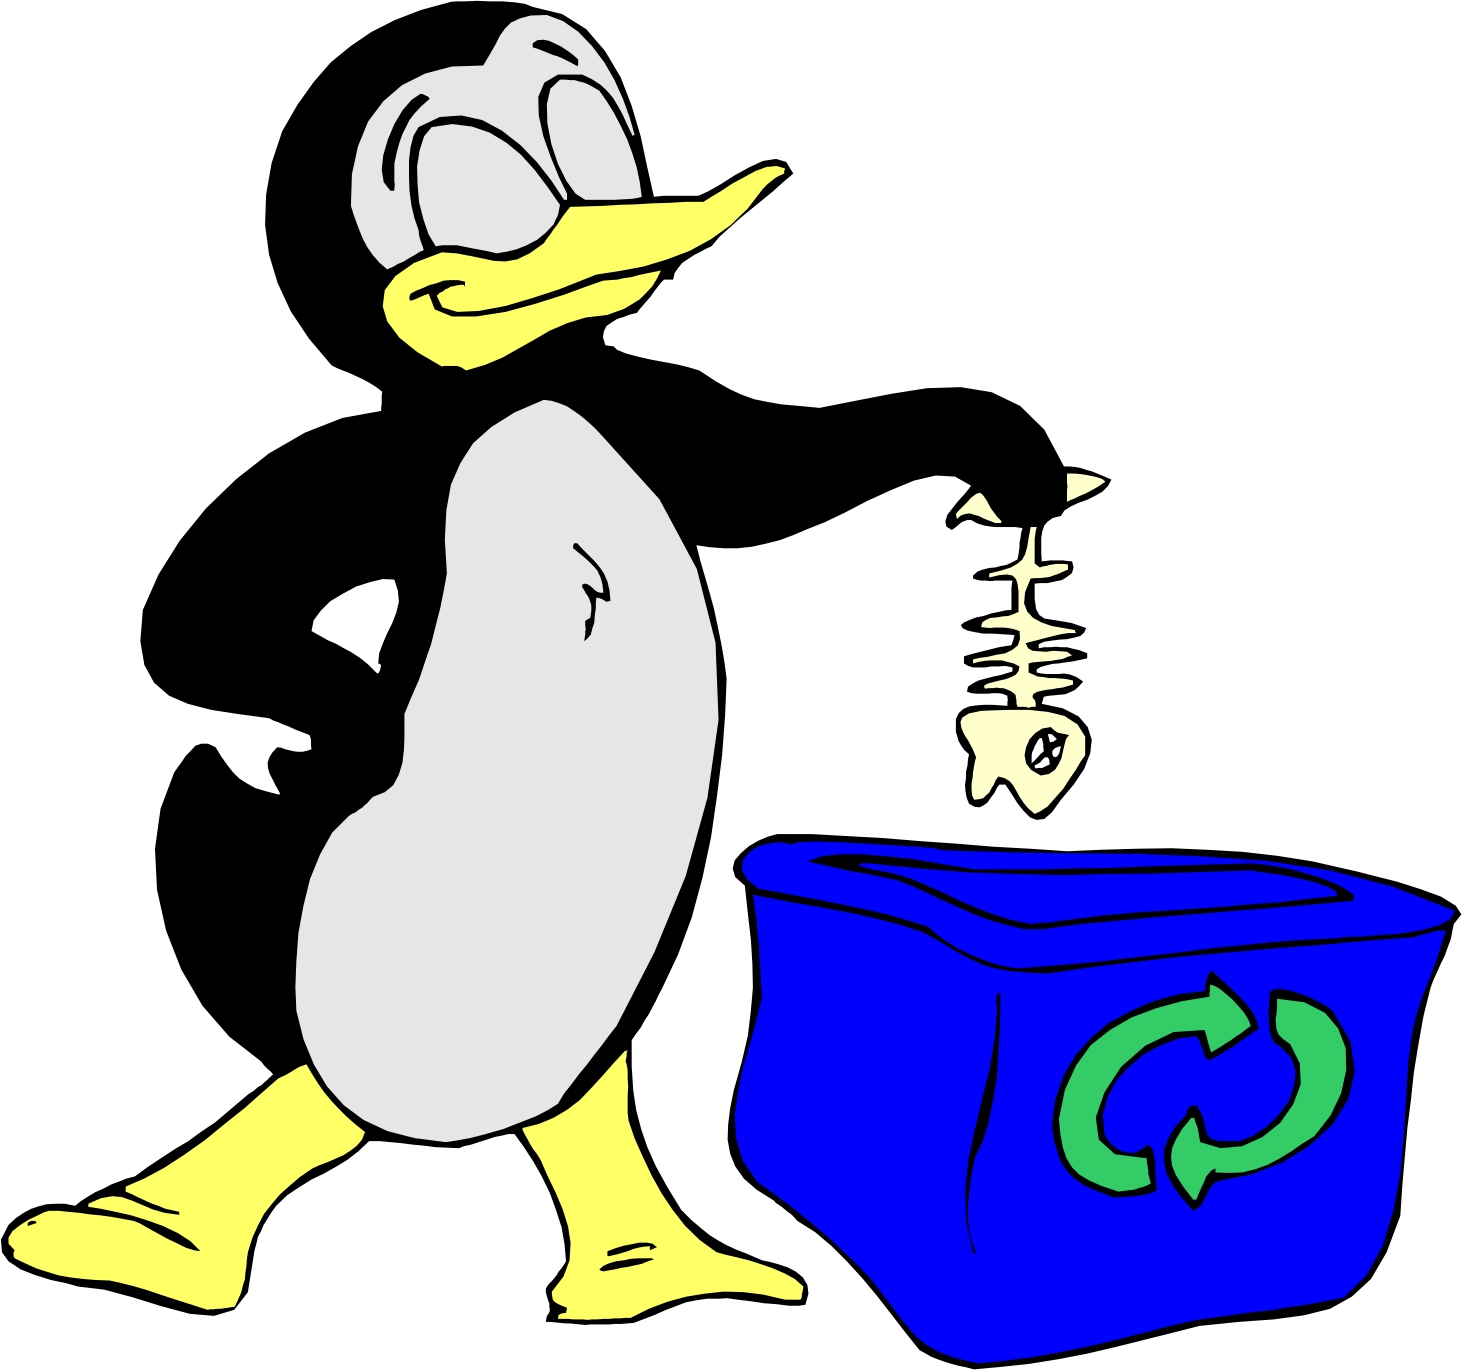 Recycling Cartoon Pictures - Cliparts.co